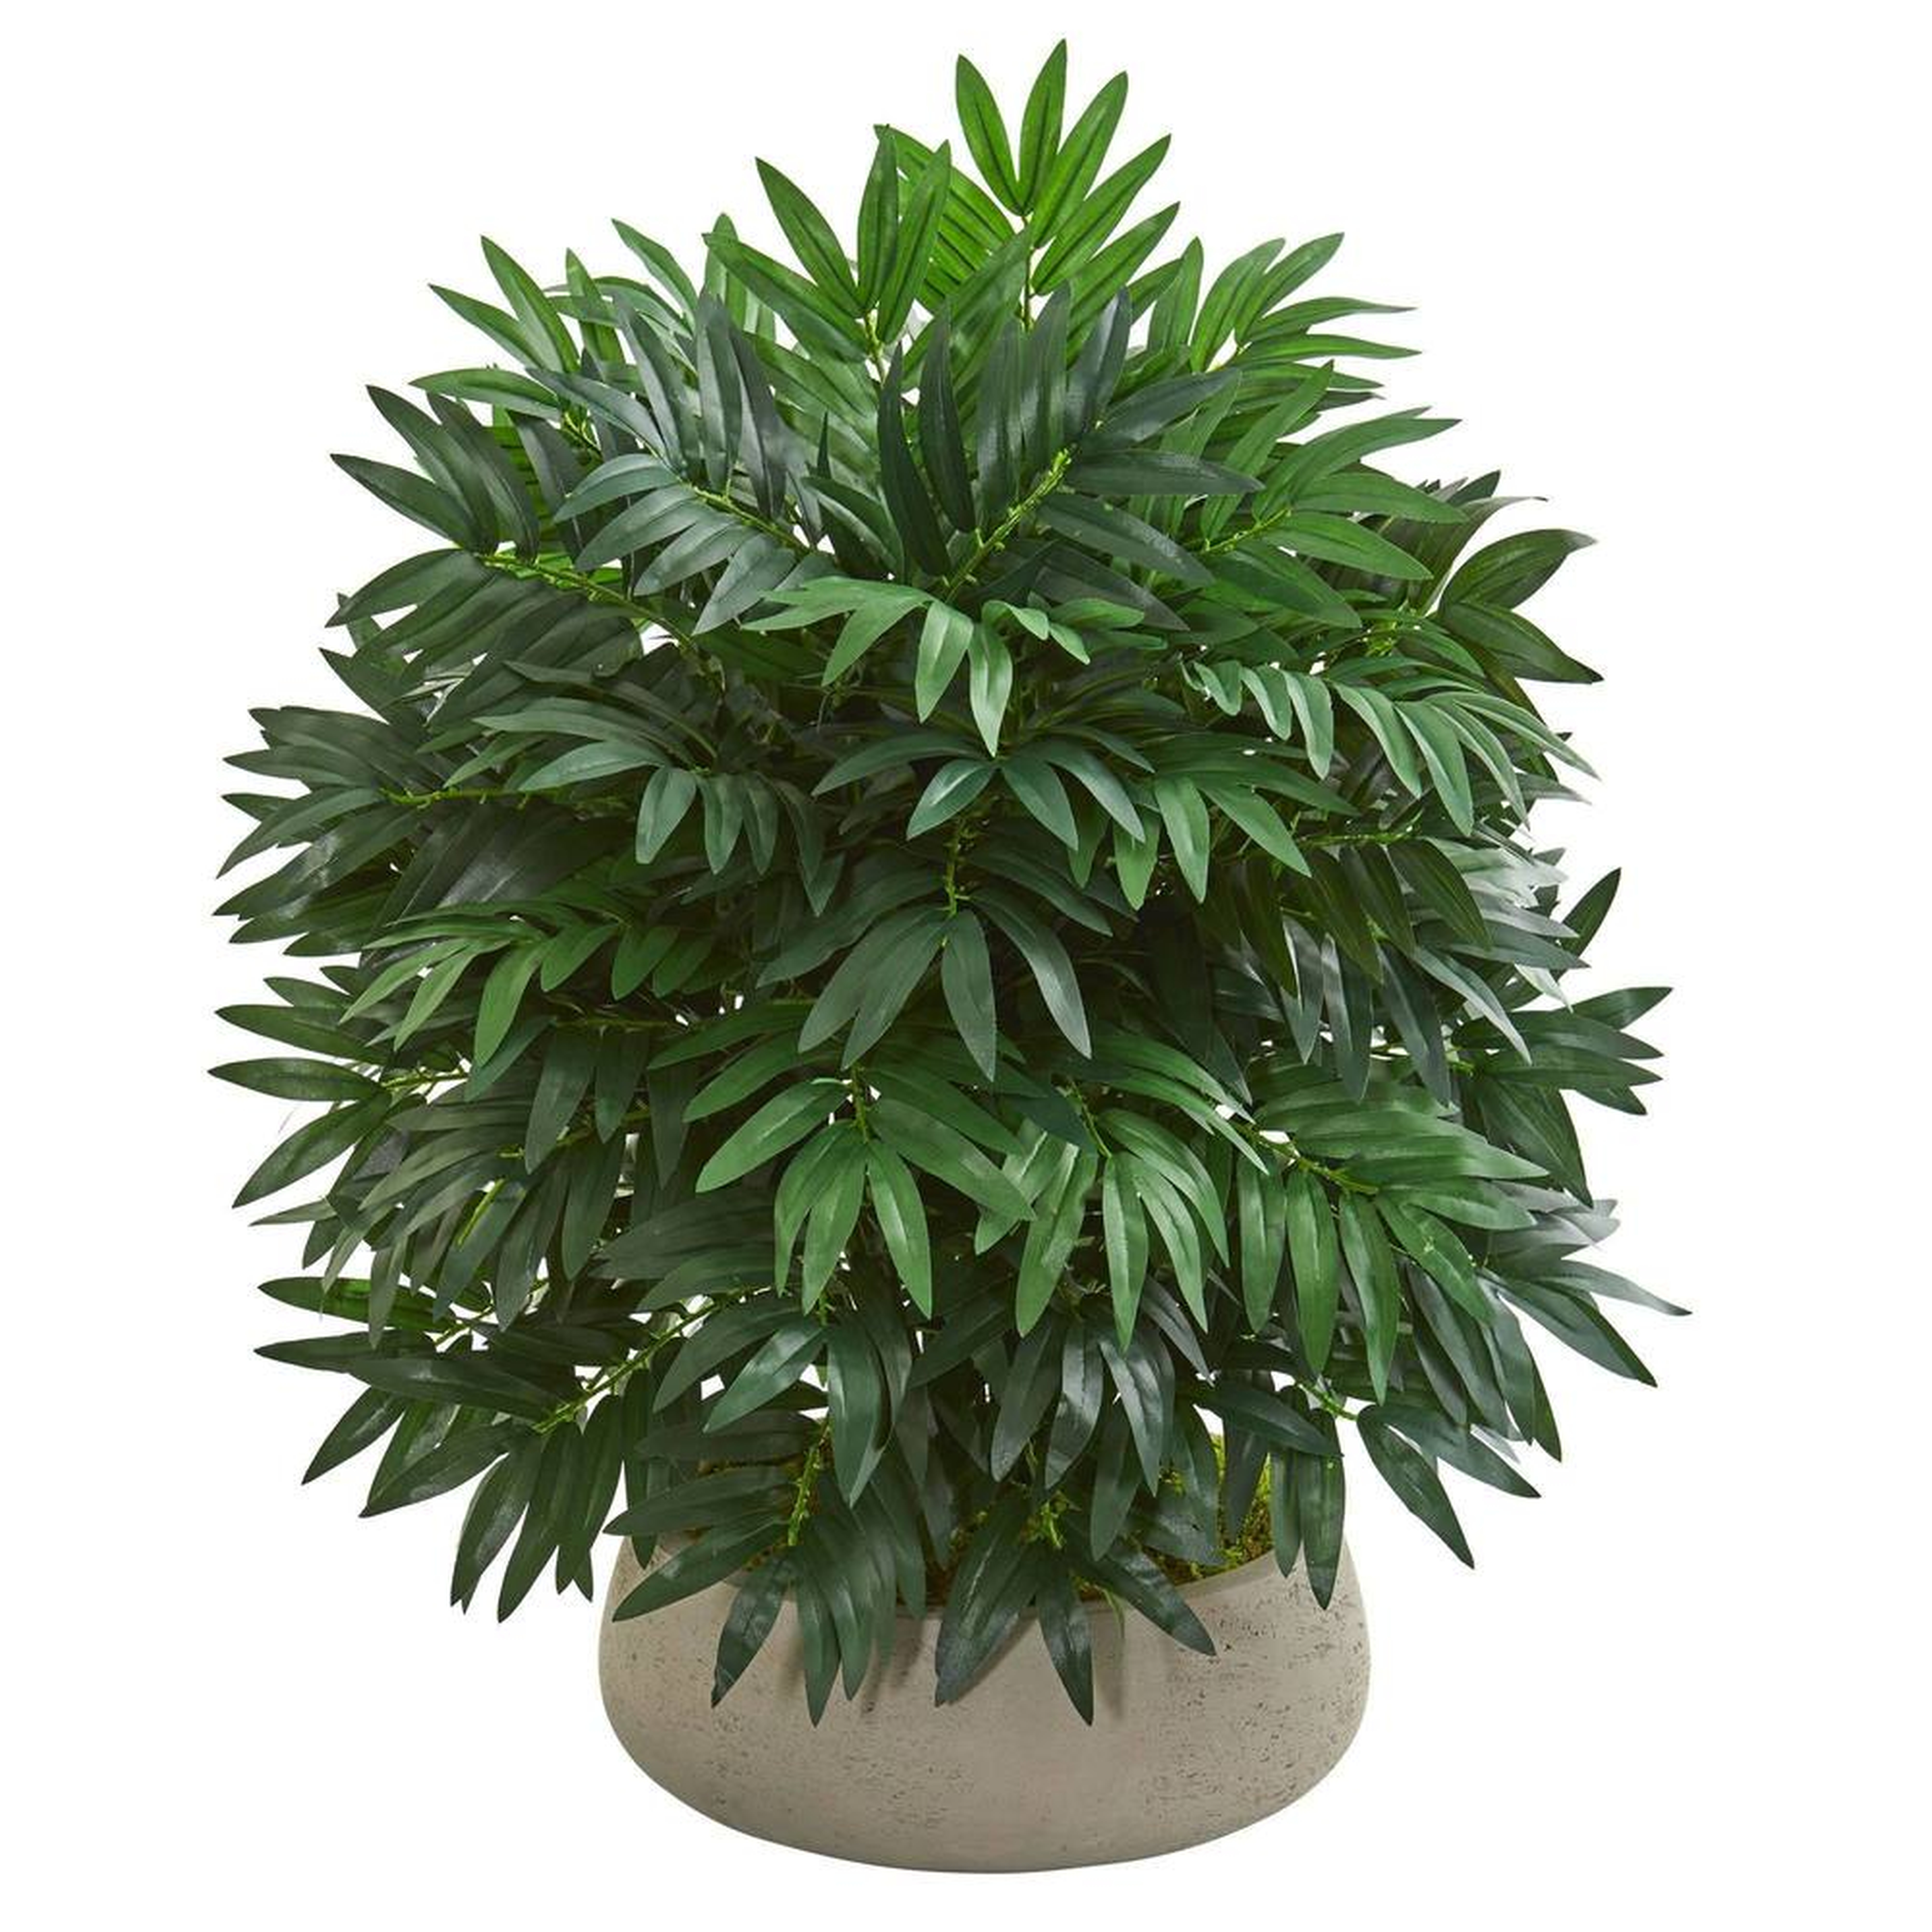 30” Bamboo Palm Artificial Plant in Stone Planter - Fiddle + Bloom